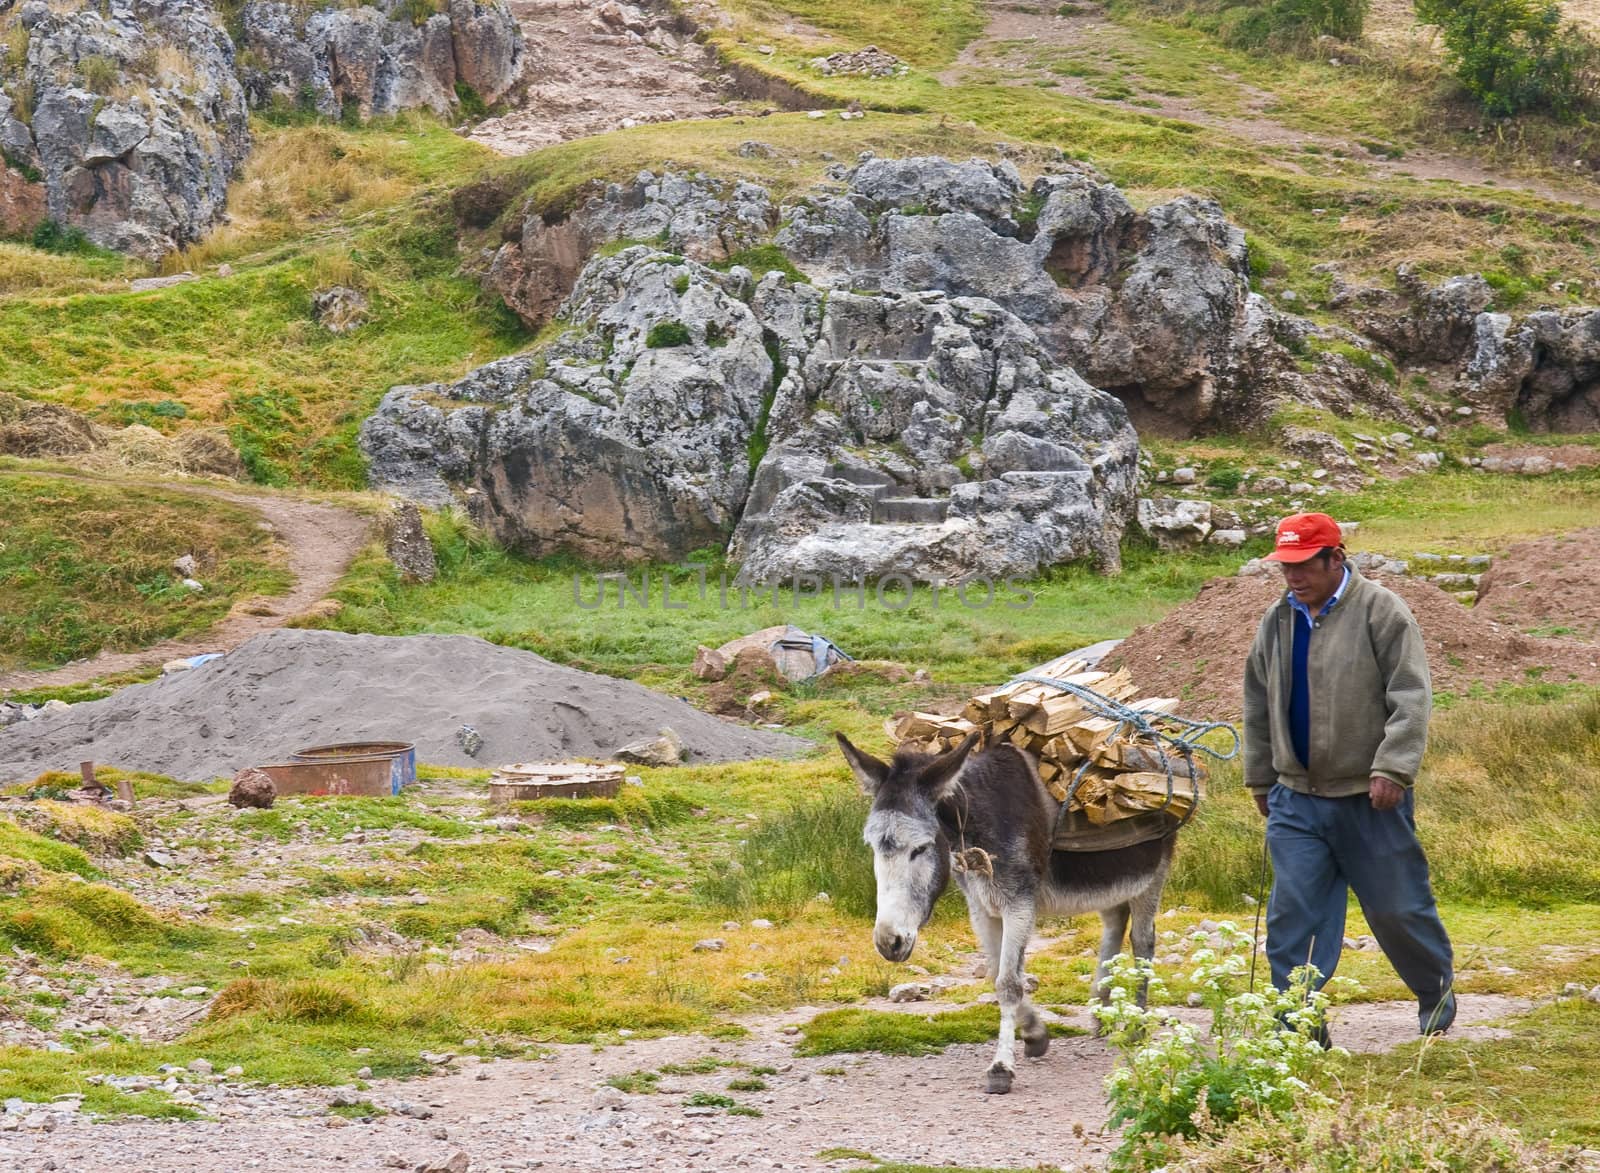 SACRED VALLEY,  PERU - MAY 26 : Donkey carrying wood in the Andes mountains of Peru